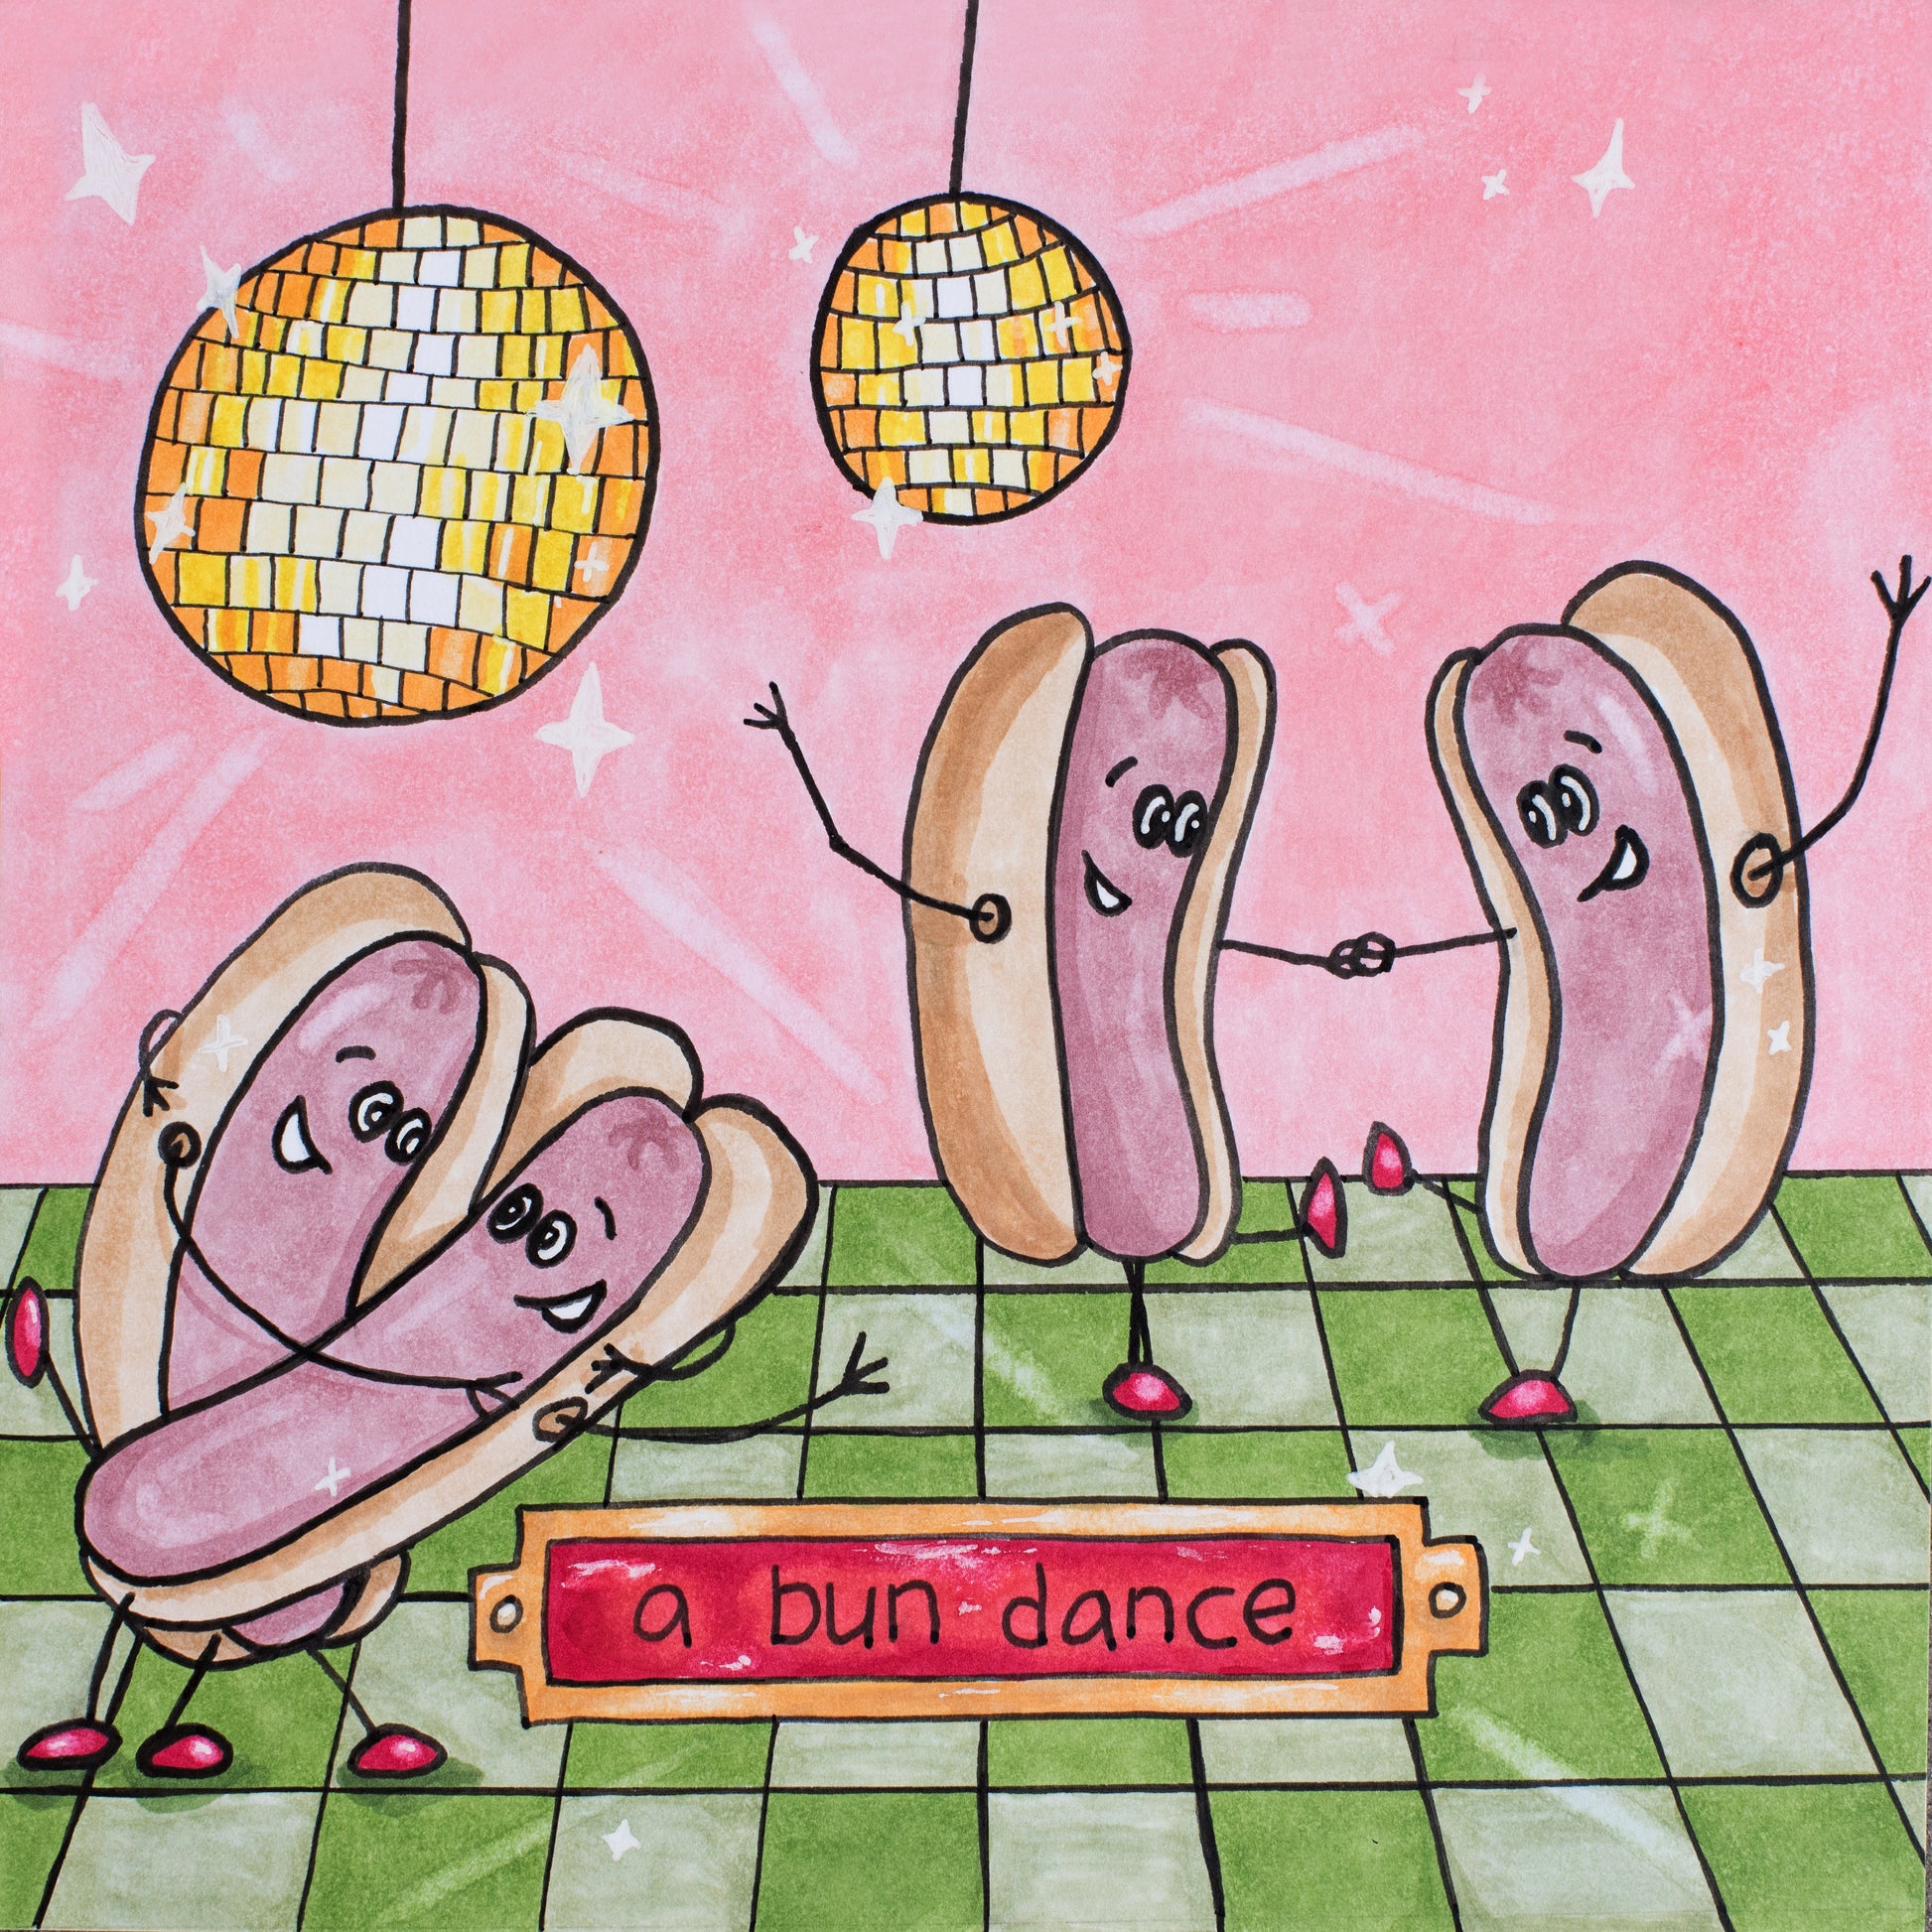 A square illustration drawn in copic markers. Two pairs of cartoon hotdogs are dancing under golden disco balls. The couple in back kicks up their feet as if swing dancing together, joined by one hand. The couple in front is engaged in a dip. All 4 hotdogs have huge grins. At the bottom is a plaque that reads "A bun dance".